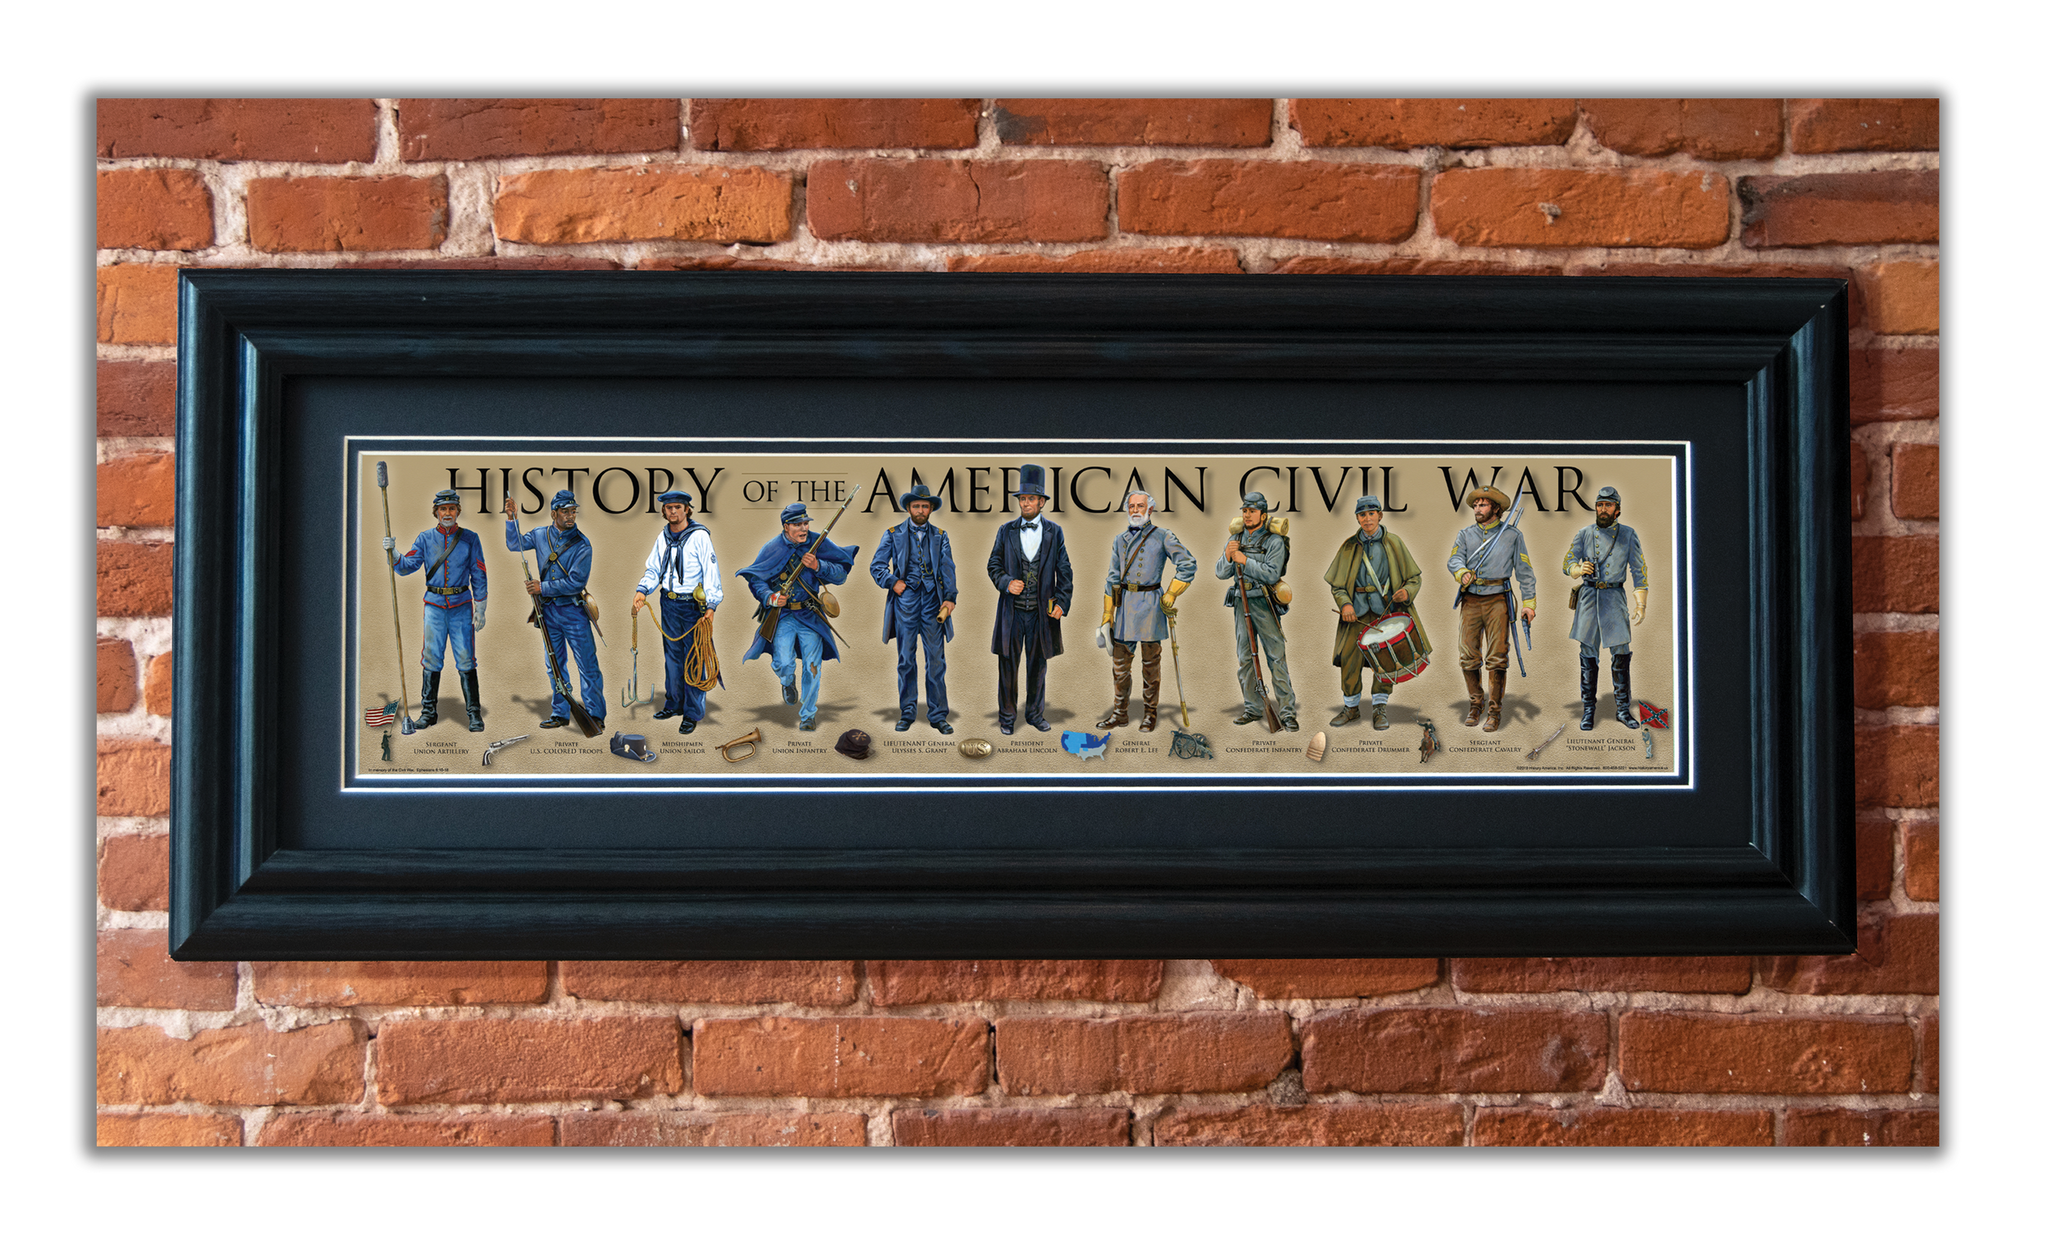 American Civil War - Framed 2” Black Double Matted, Grooved Molding 6"x24”